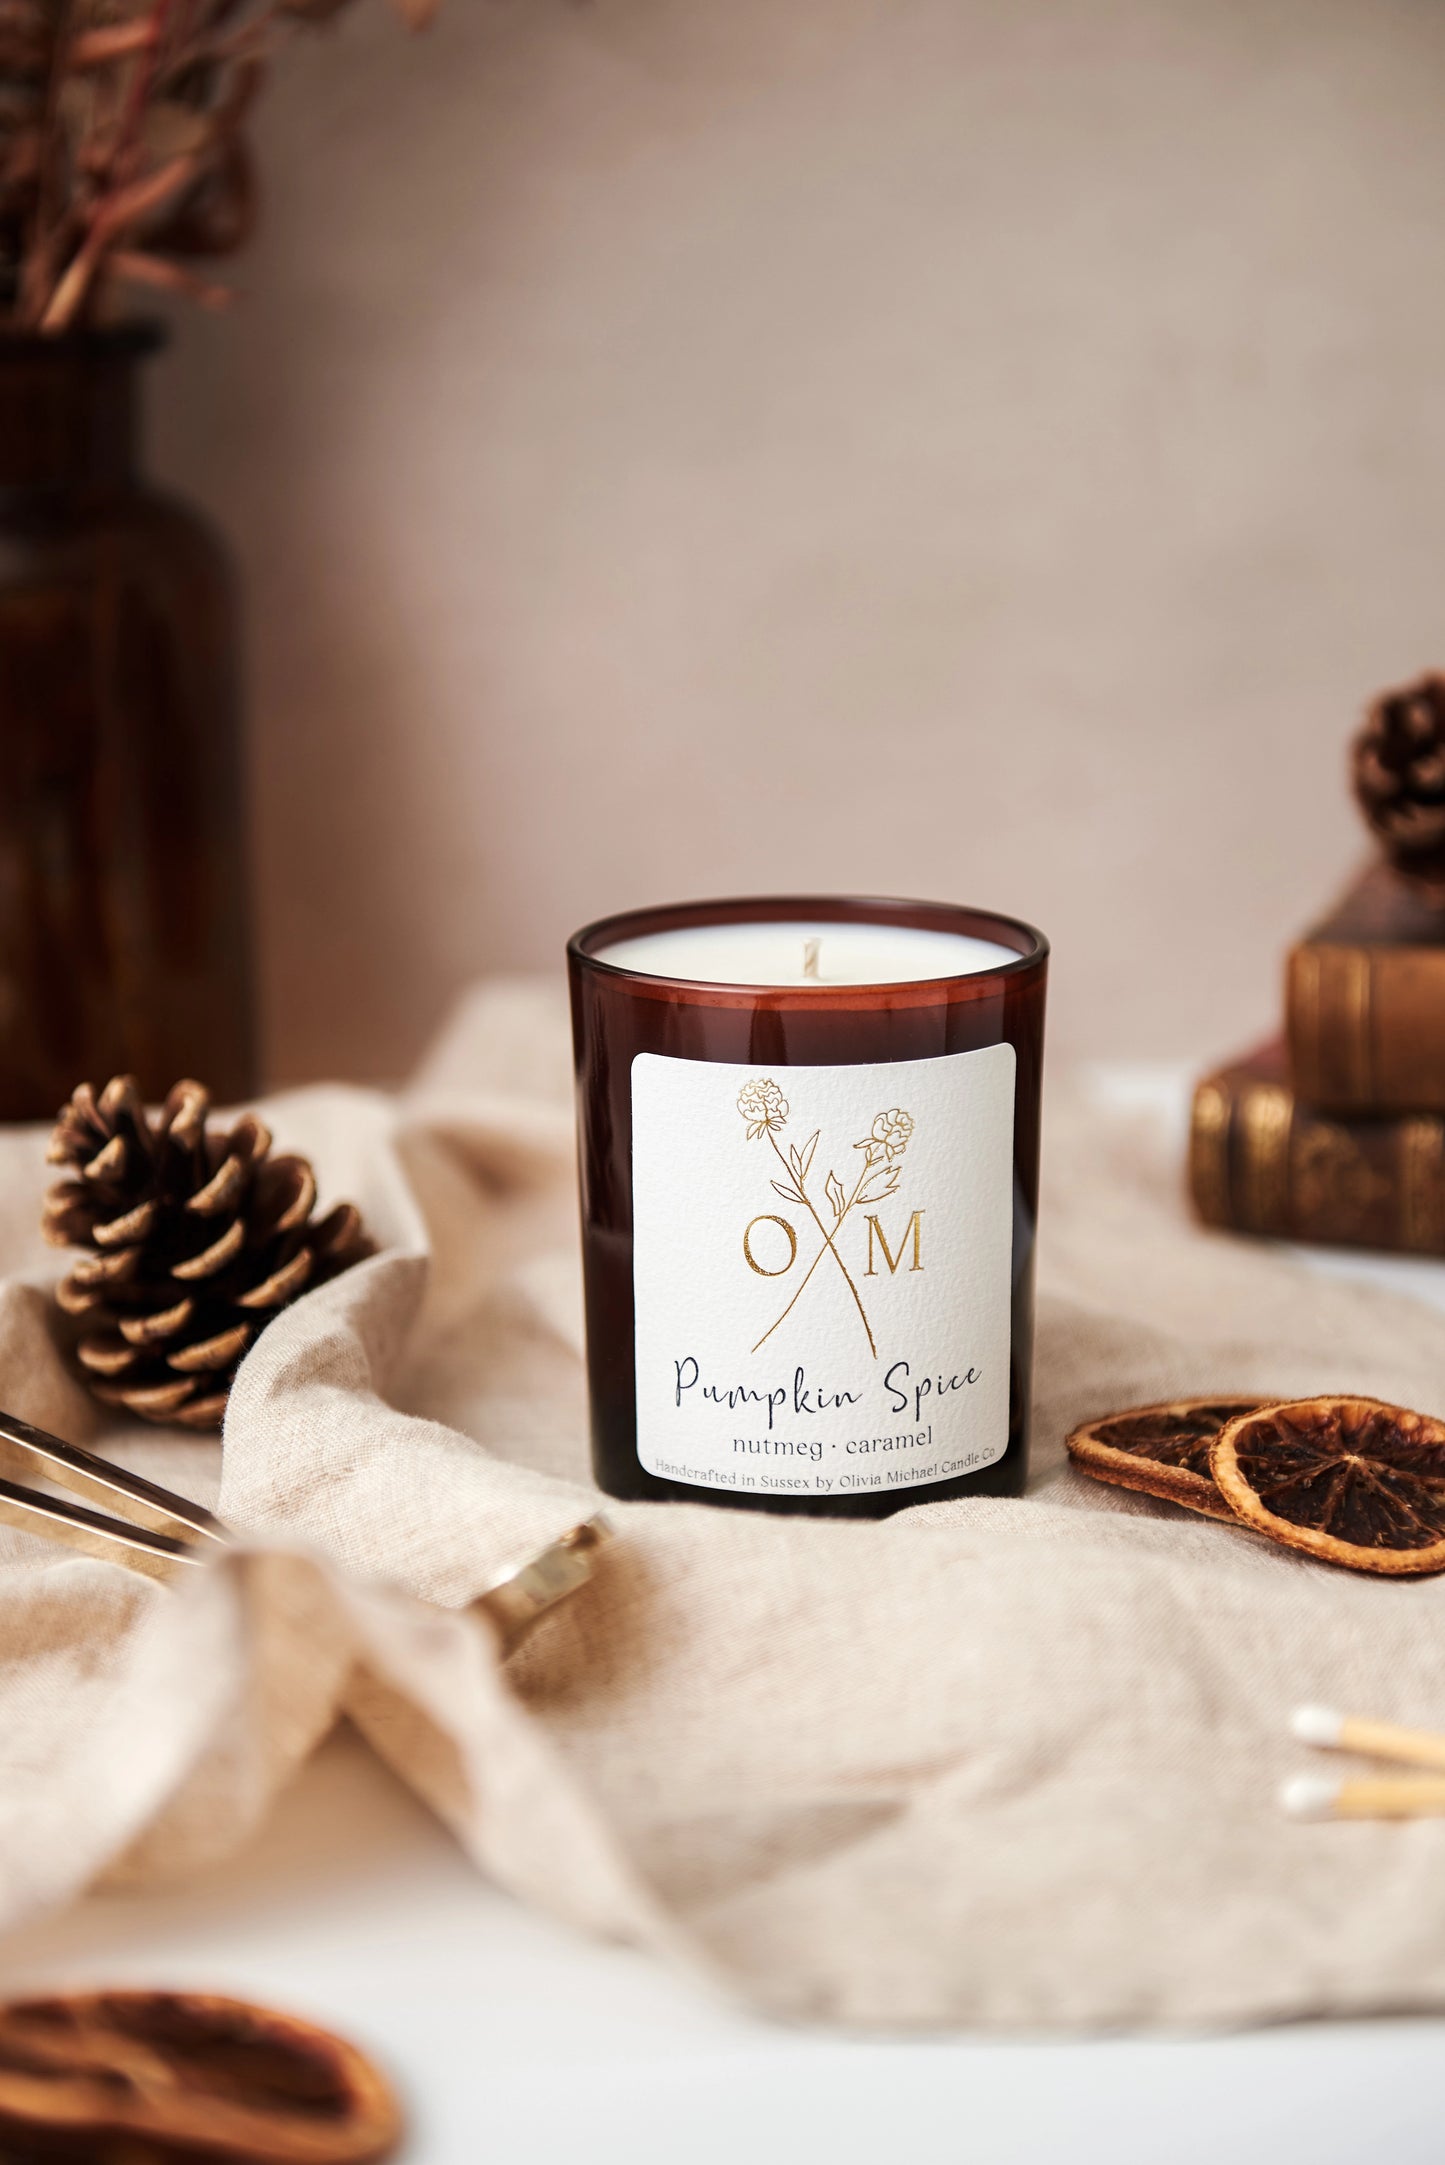 Our autumn scented candle is on display in an amber glass jar.